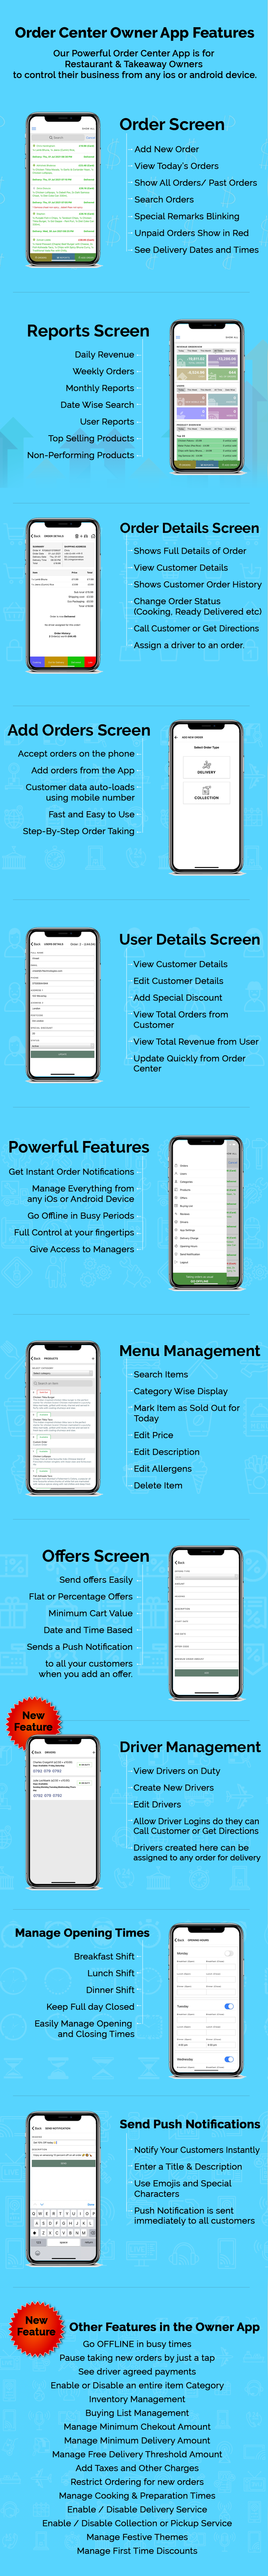 Best Takeaway Restaurant Online Food Ordering Delivery System - iOs Android Kitchen Onwer Web Admin - 10